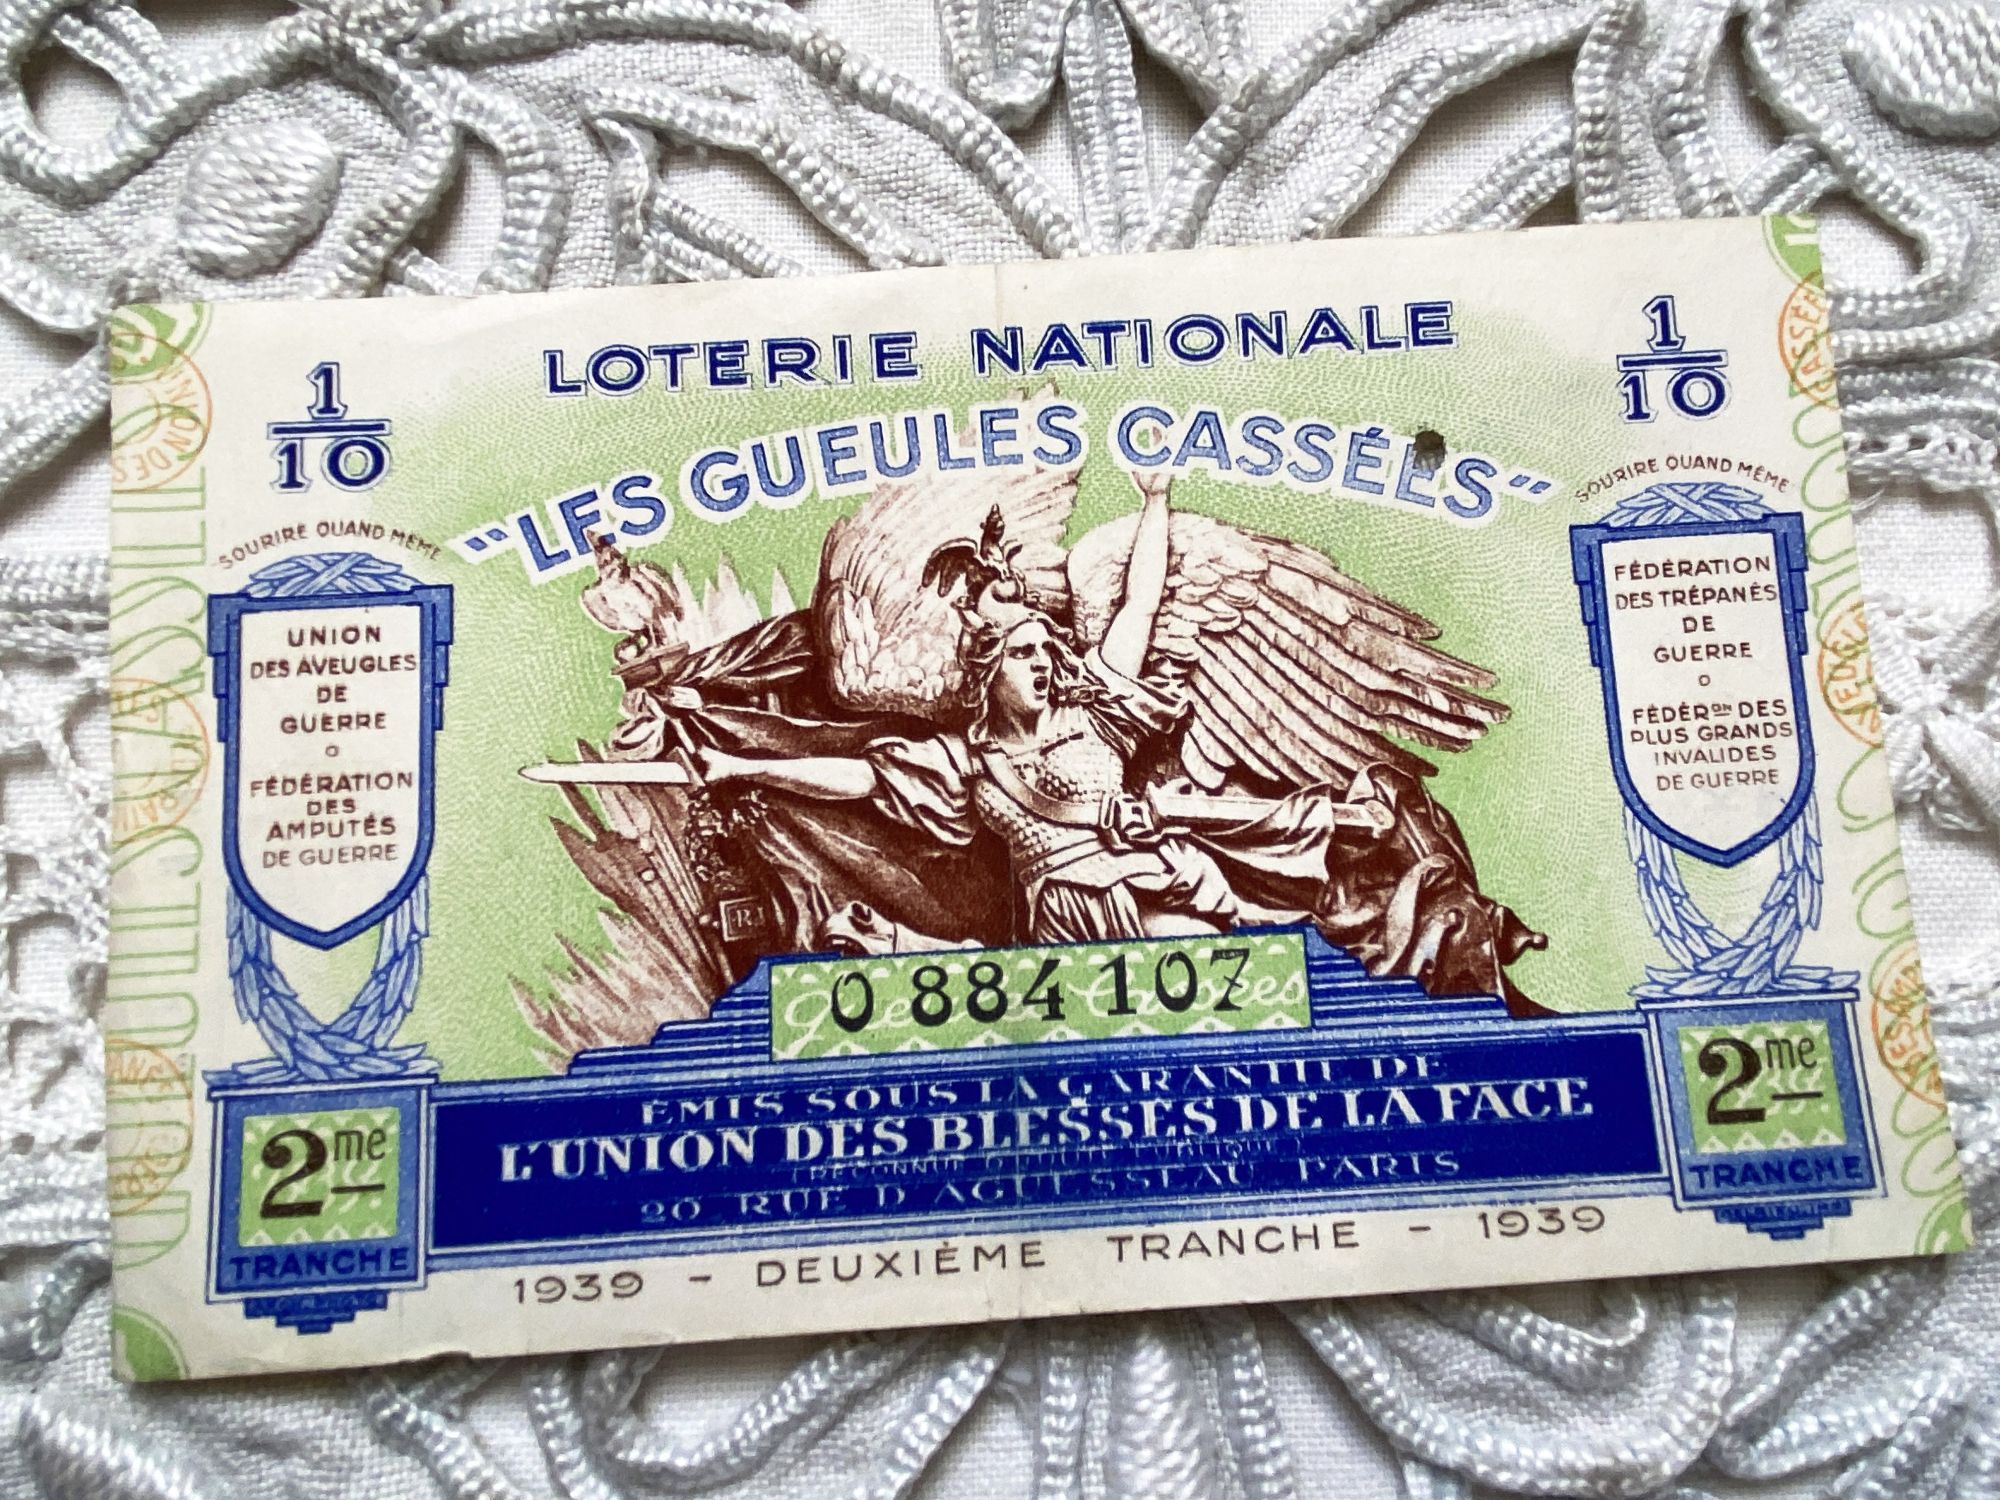 Huge French lottery ticket "Les gueules cassées" from 1939